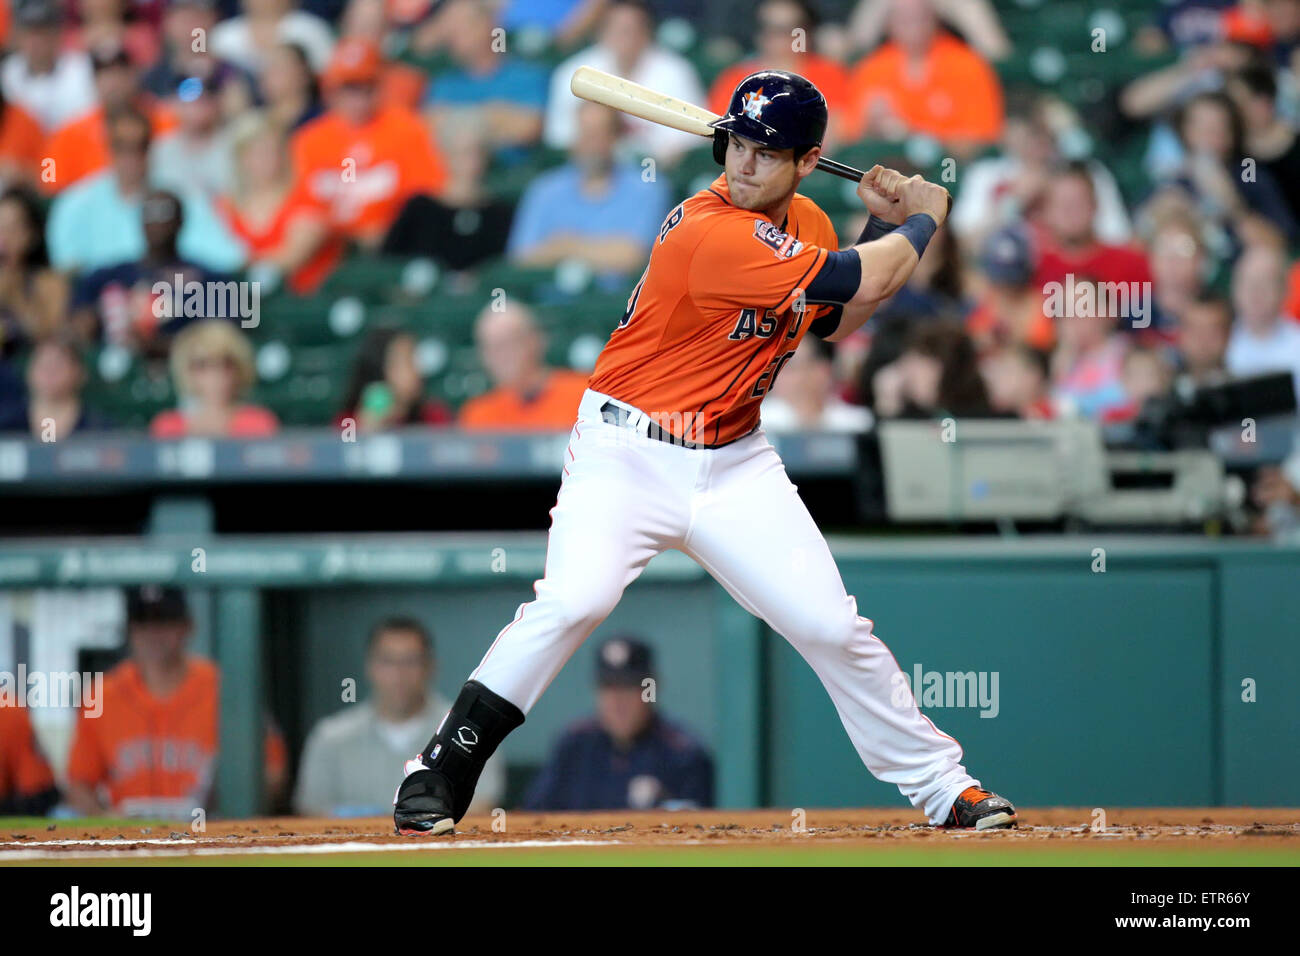 Former Gator Preston Tucker Promoted To Major Leagues By Houston